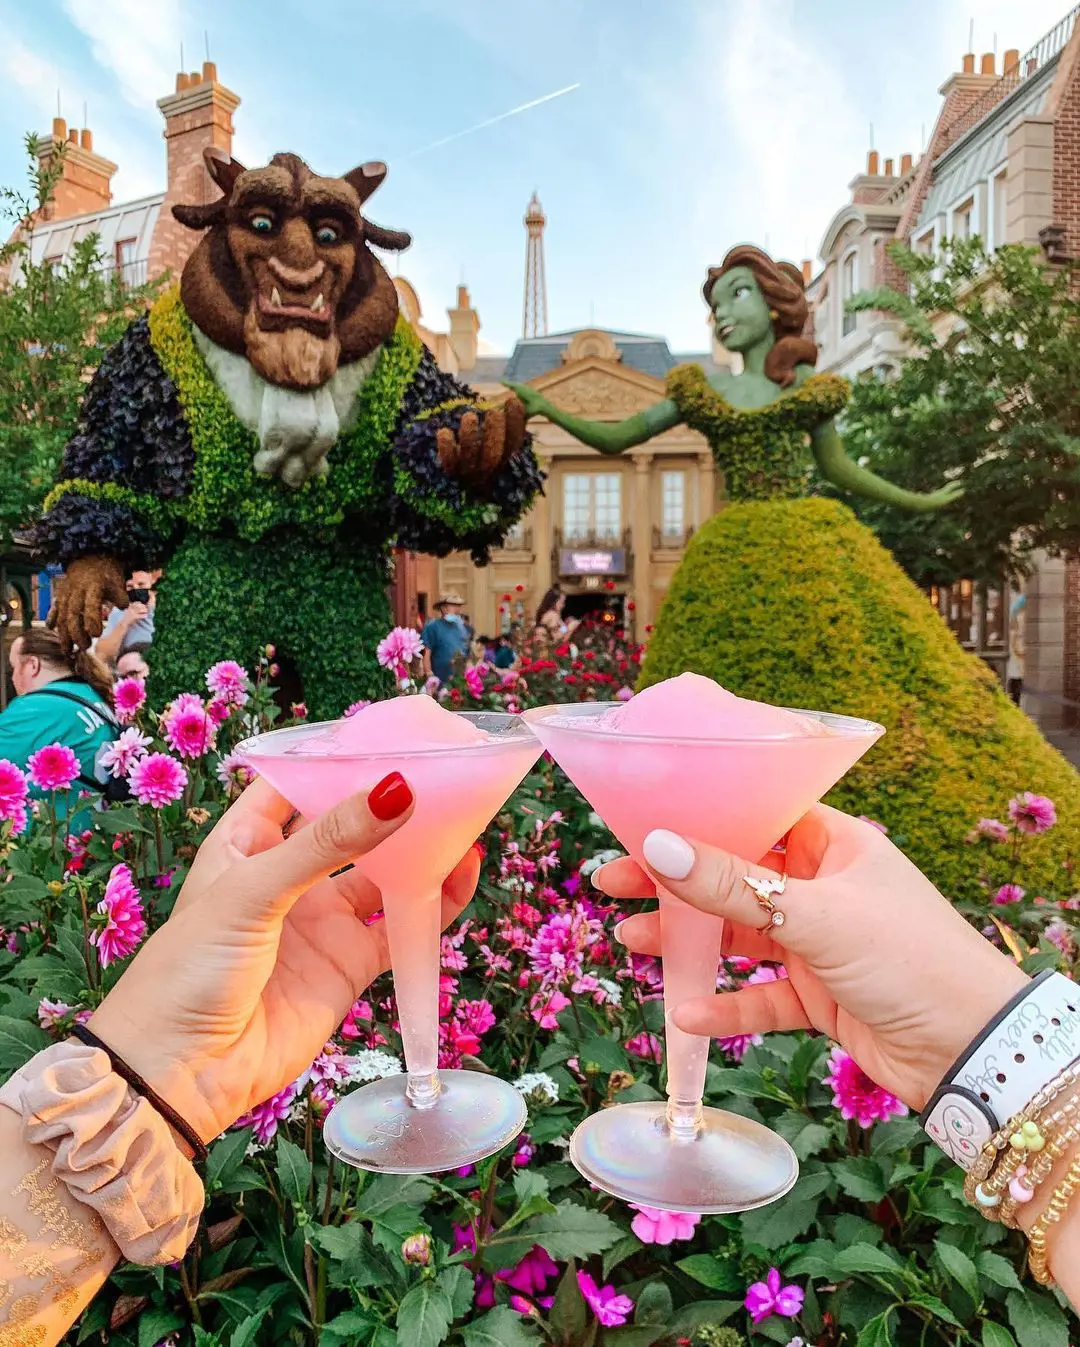 Grab the drink and enjoying the Disney World for best experience